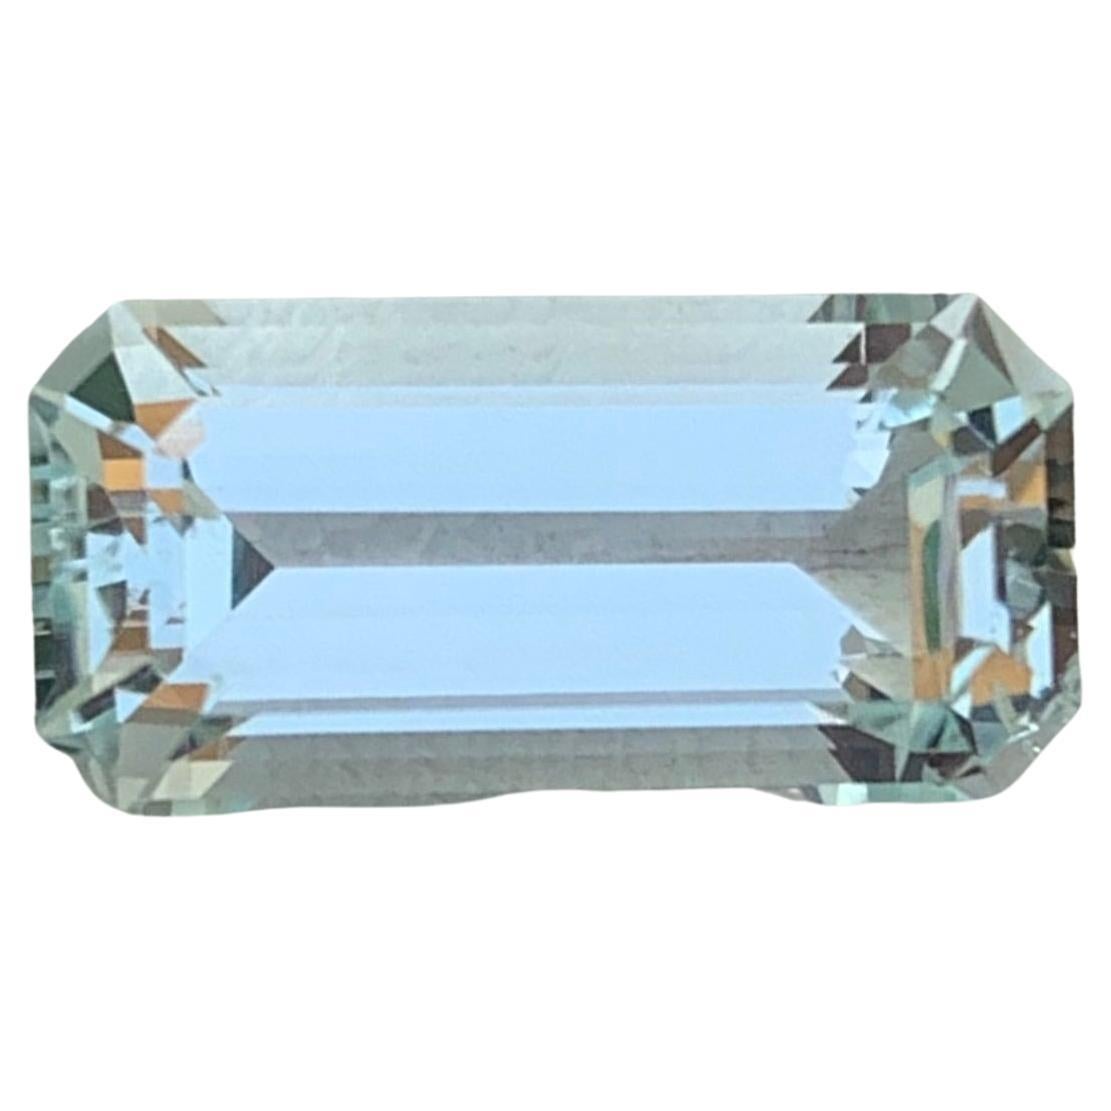 Faceted Aquamarine 
Weight: 4.35 Carats 
Dimension: 14x6.9x5.8 Mm
Origin: Shigar Valley Pakistan 
Color: Light
Shape: Blue
Certificate: On Customer Demand 
Treatment: Non
Aquamarine, the captivating gemstone of the sea, derives its name from the